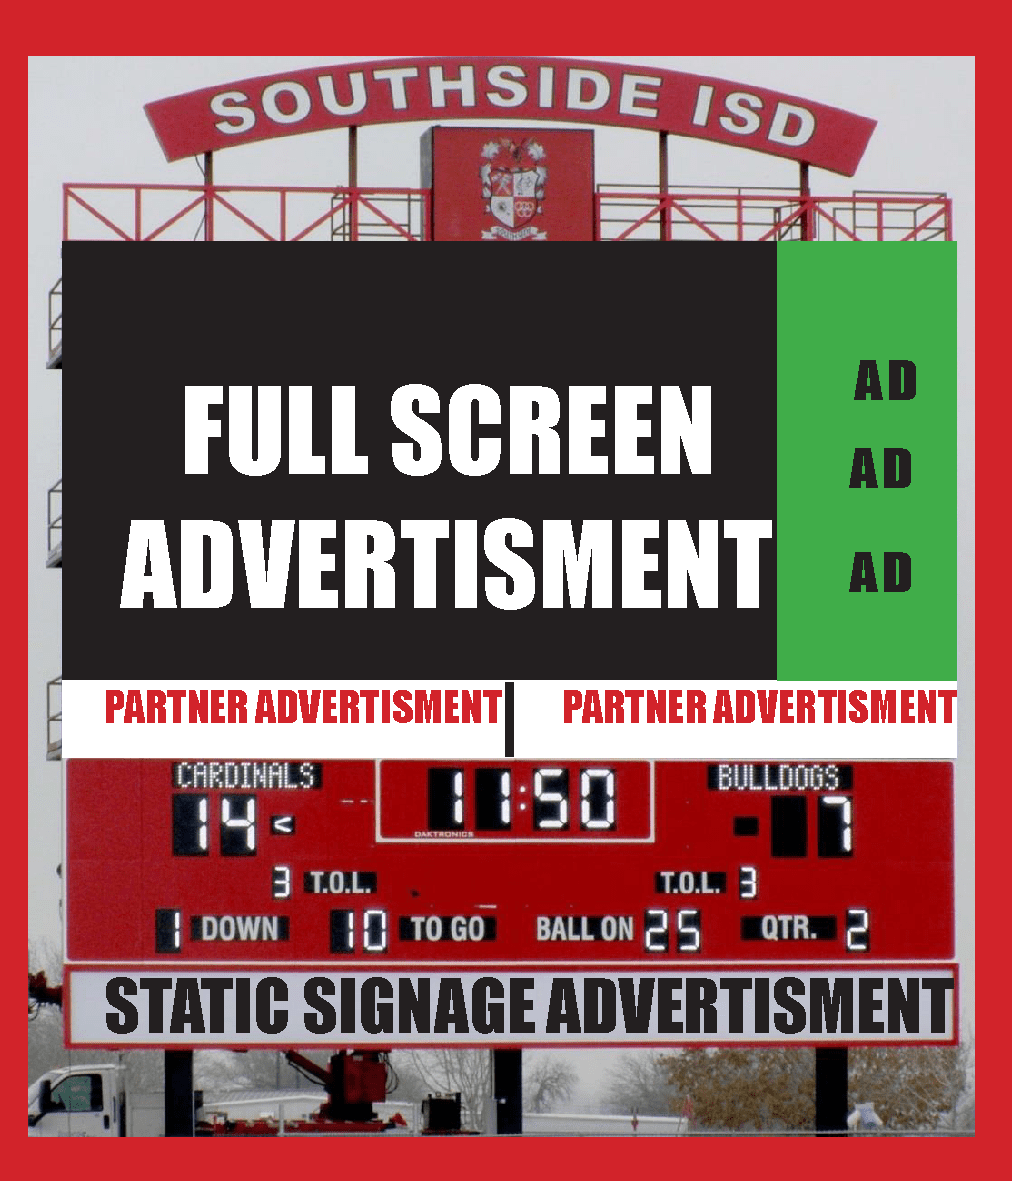 JUMBOTRON Ads Final flyer 2019 2020_Page_2